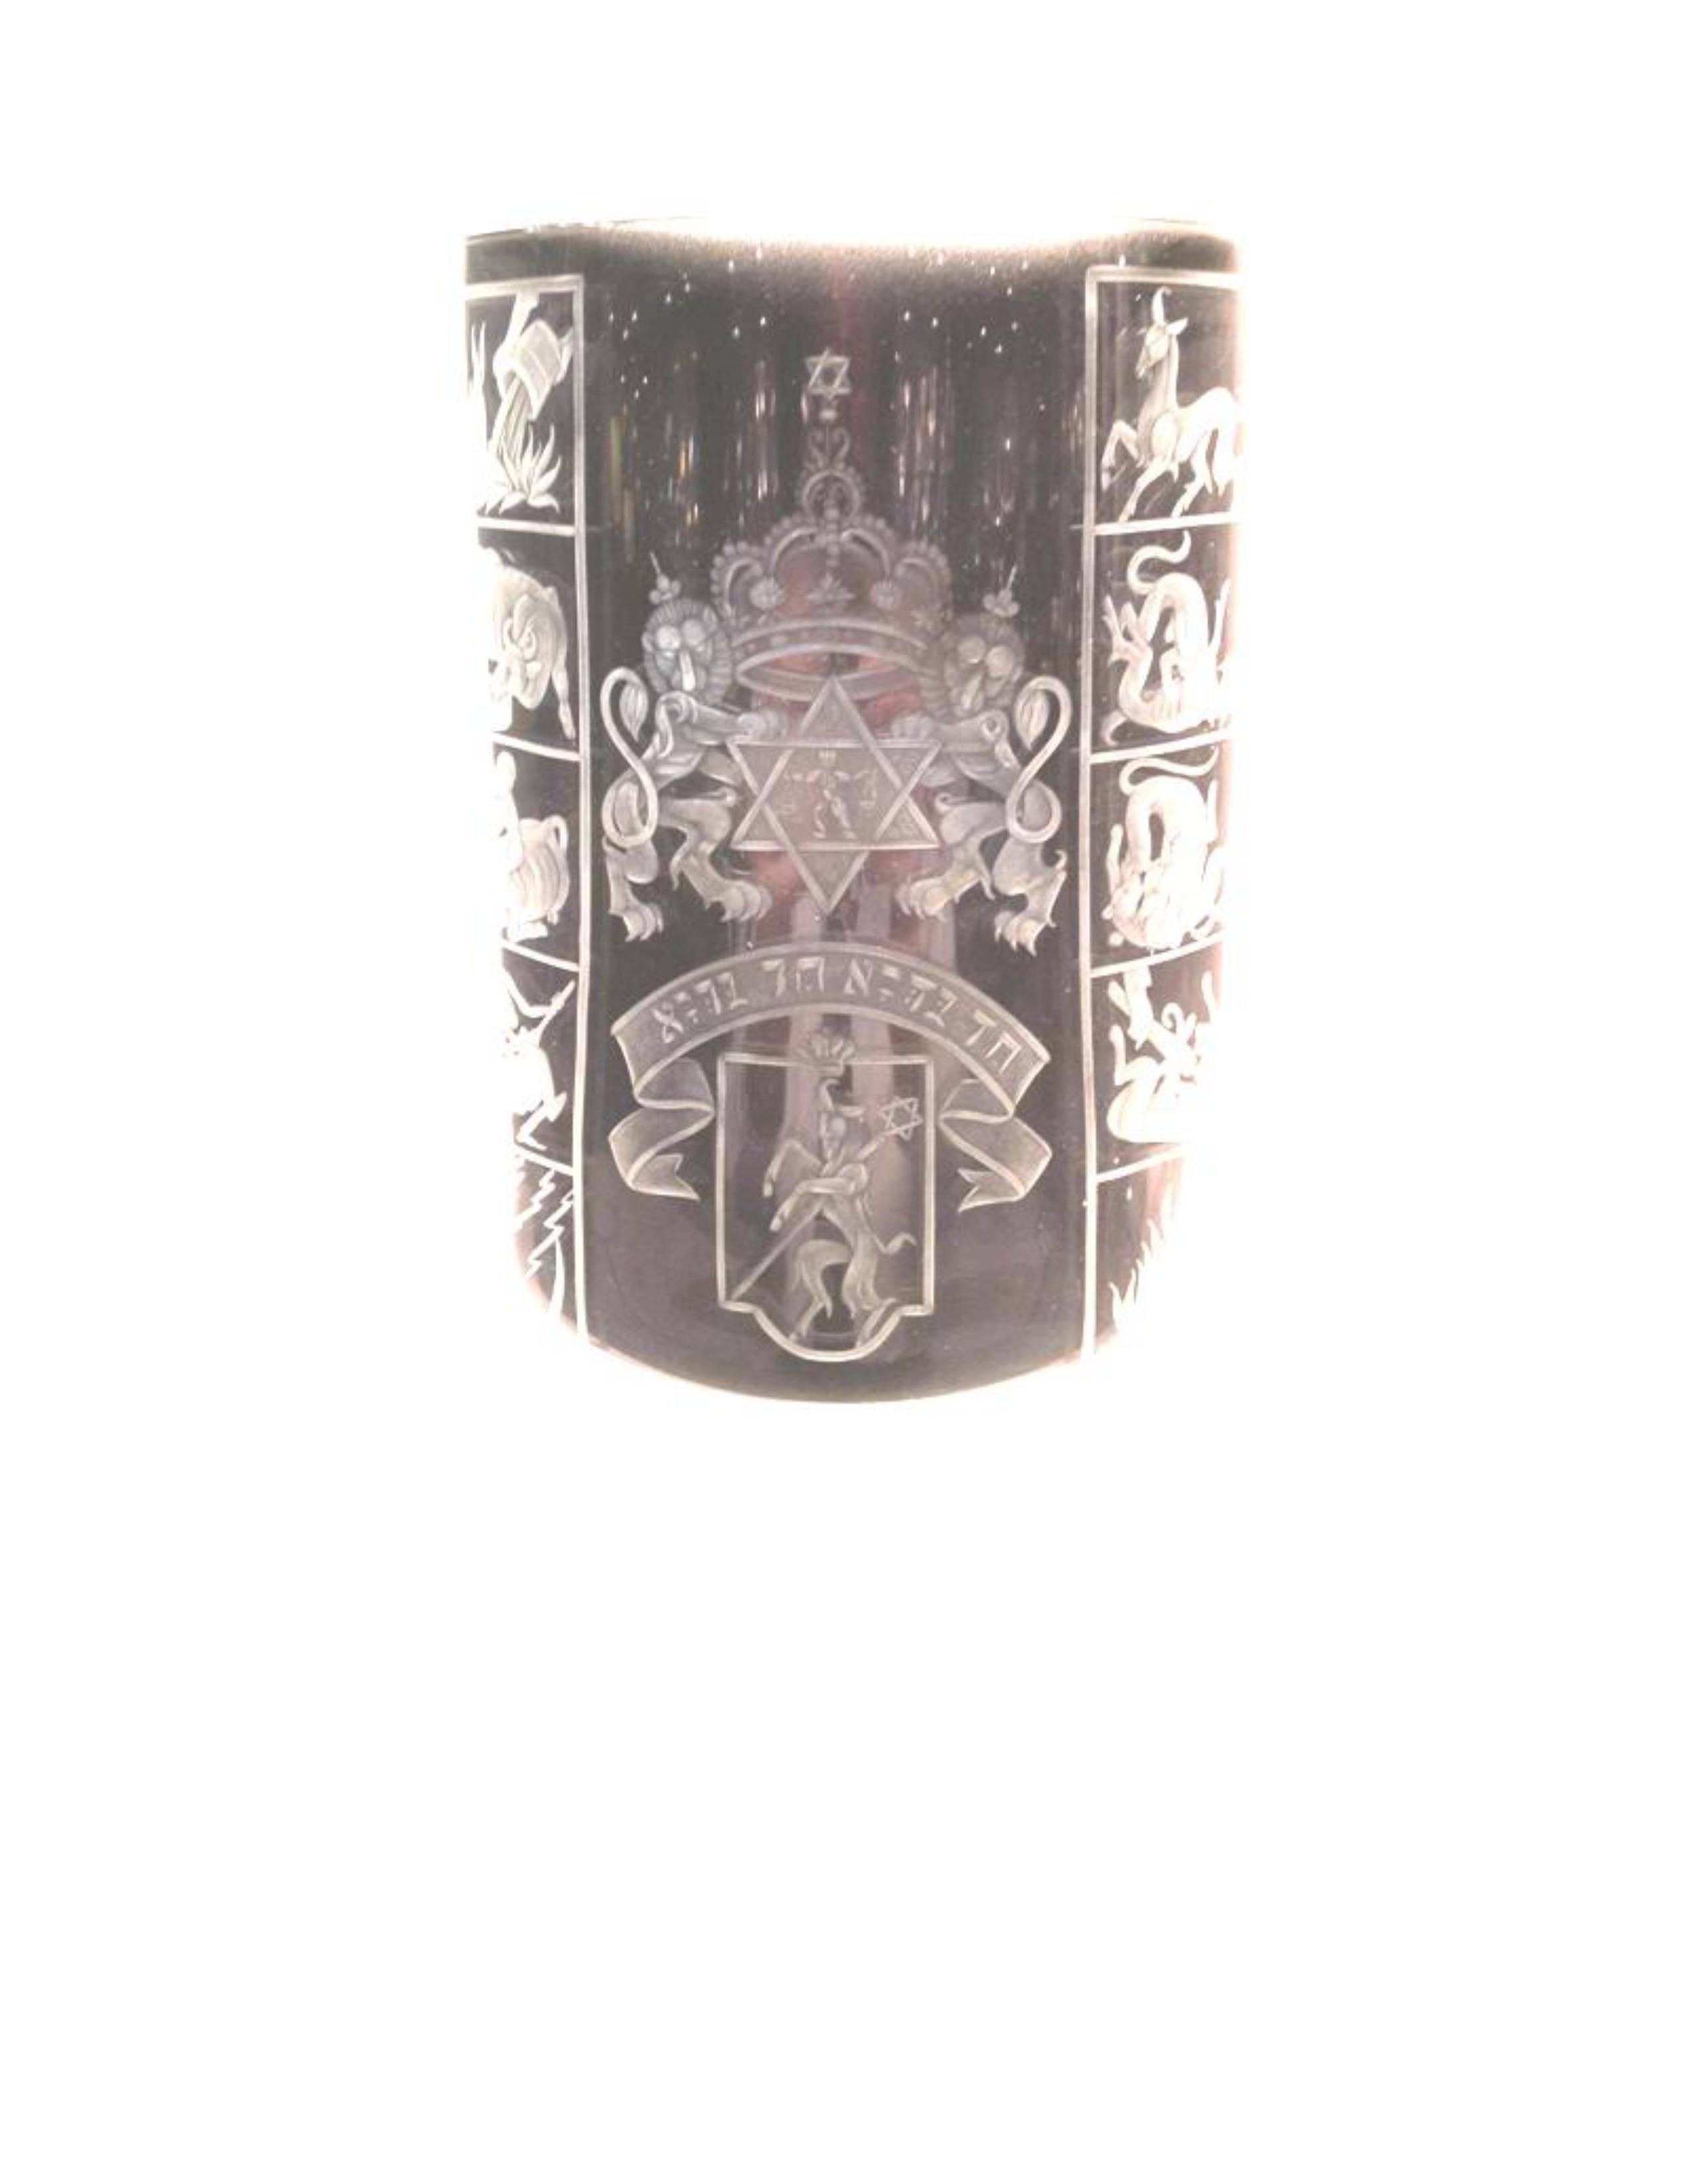 Clear crystal engraved pokale commemorating the holiday of Passover. The engravings tell a story from the Passover Haggadah and are based upon the famed 1937 illustrated Haggadah by Arthur Szyk. This work was executed in the Moser Glassworks, and